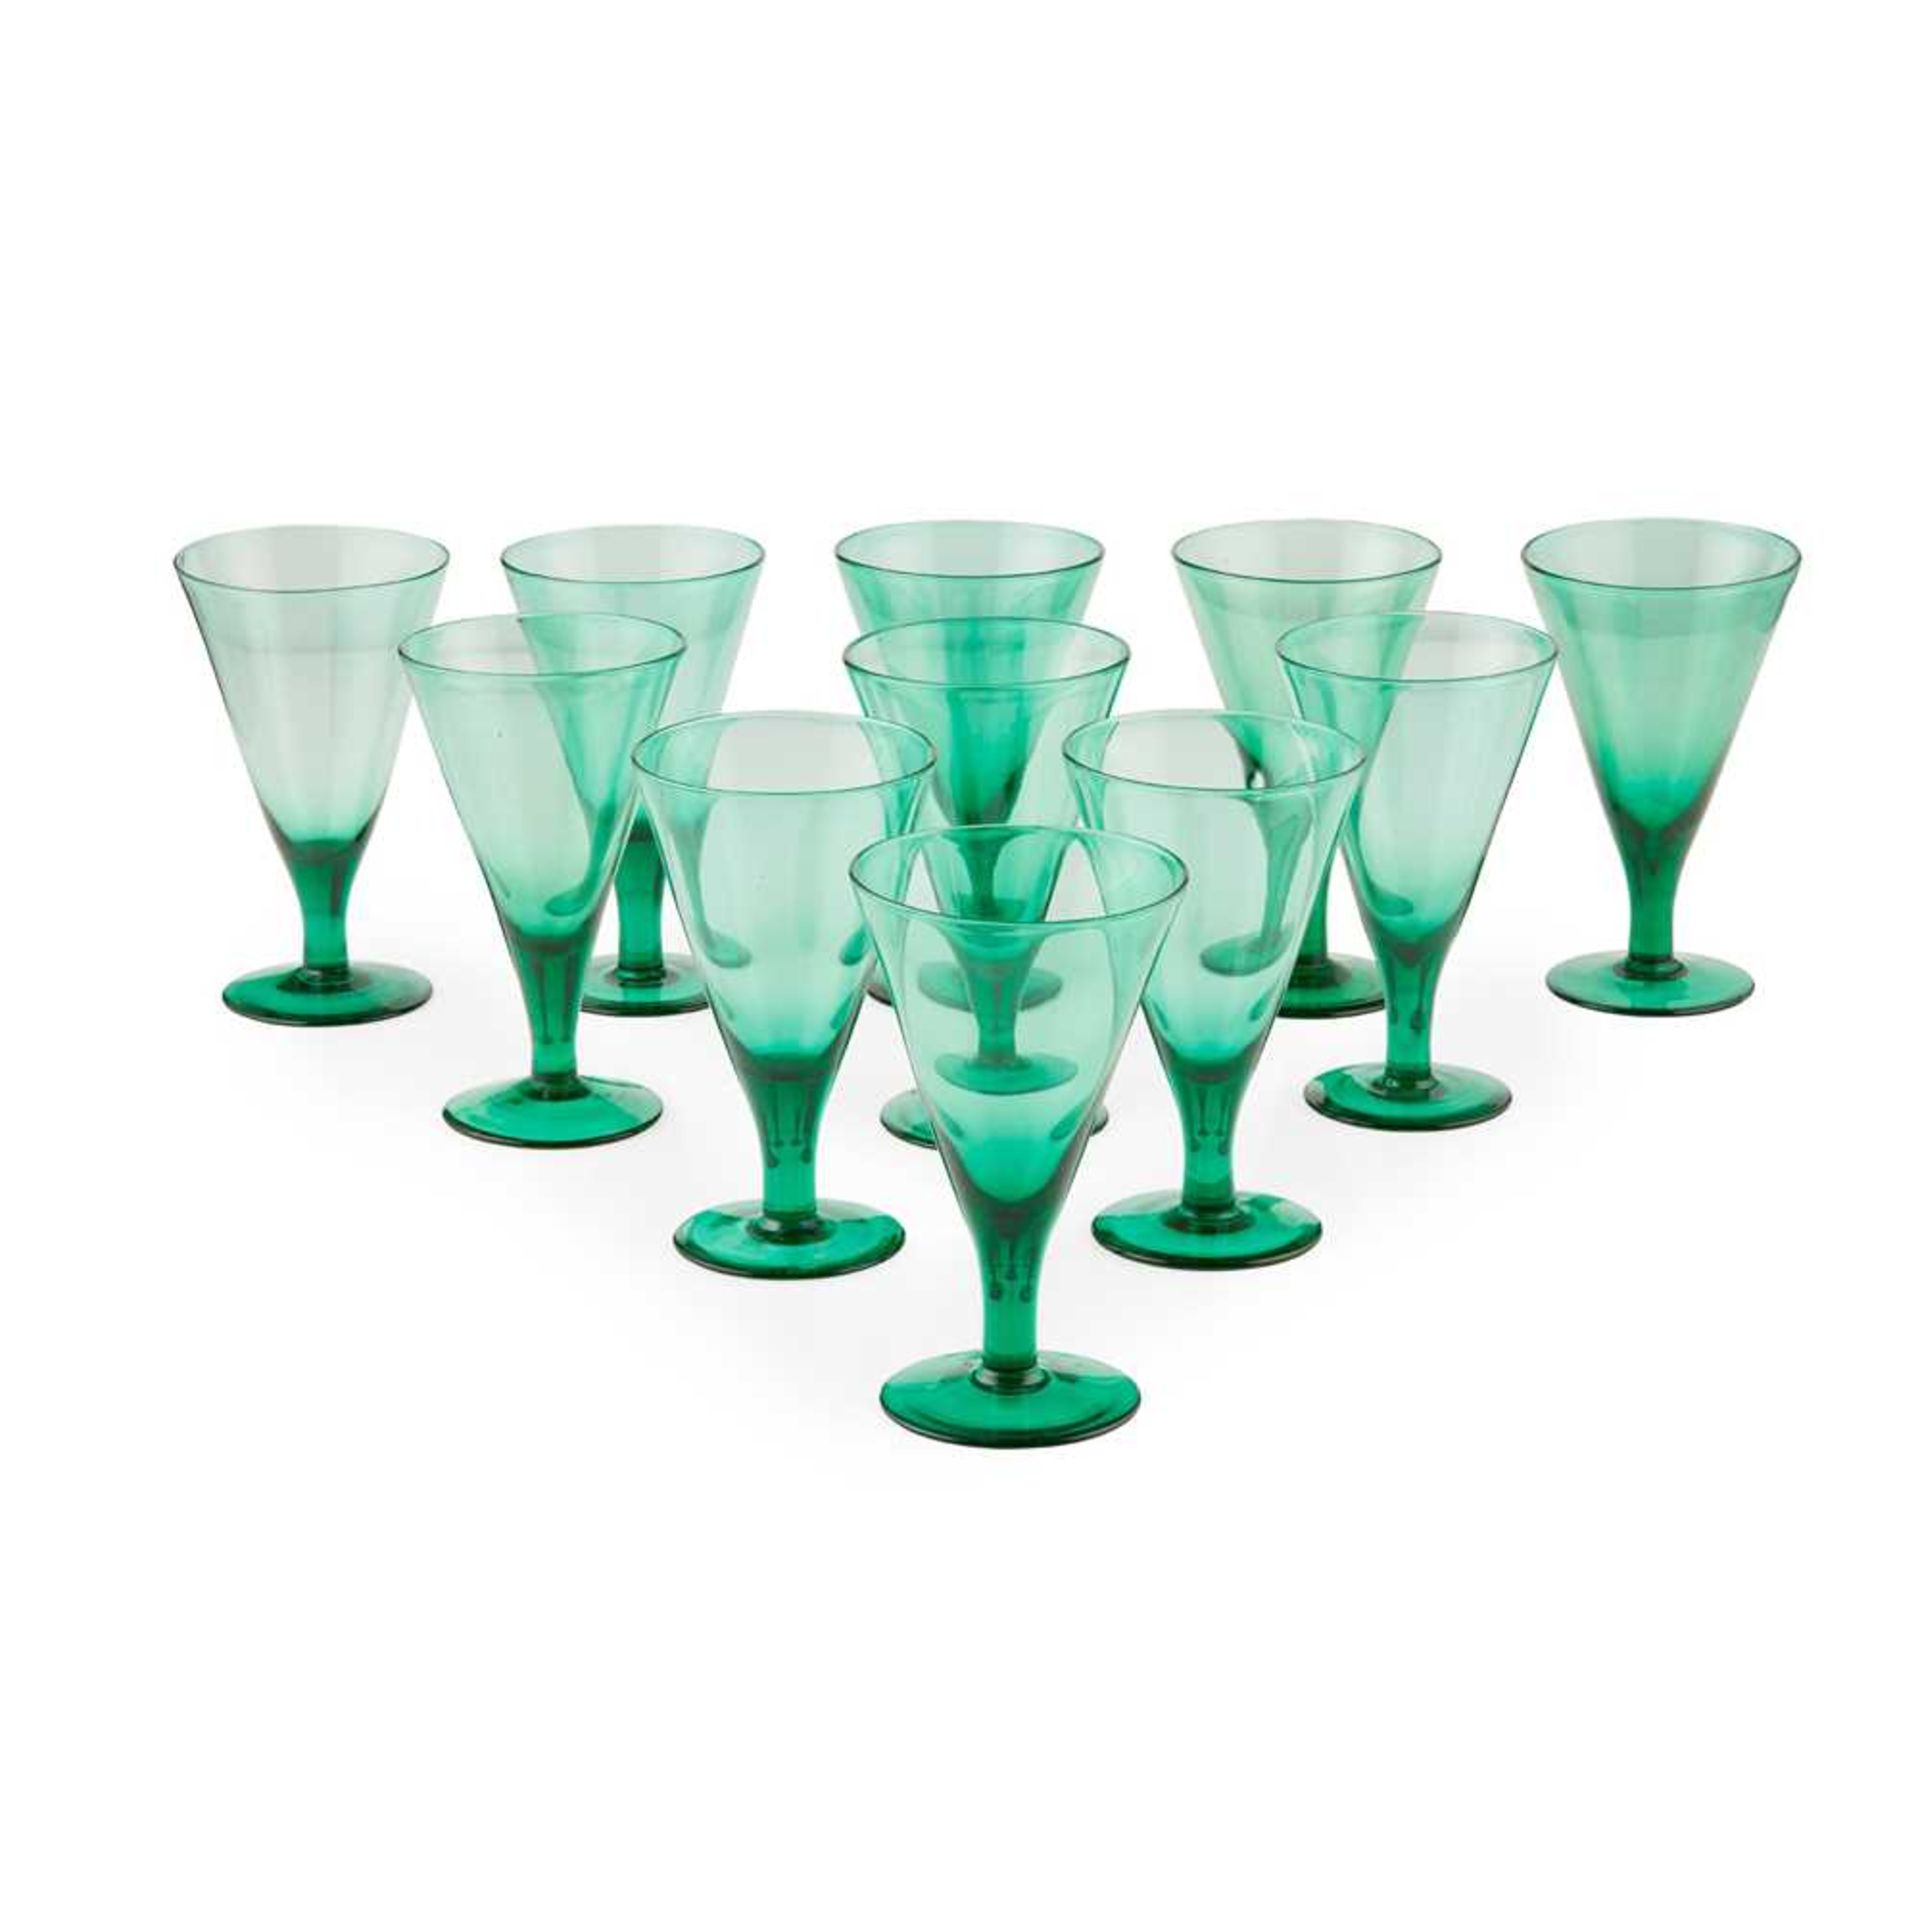 SET OF ELEVEN LATE GEORGIAN GREEN WINE GLASSES EARLY 19TH CENTURY